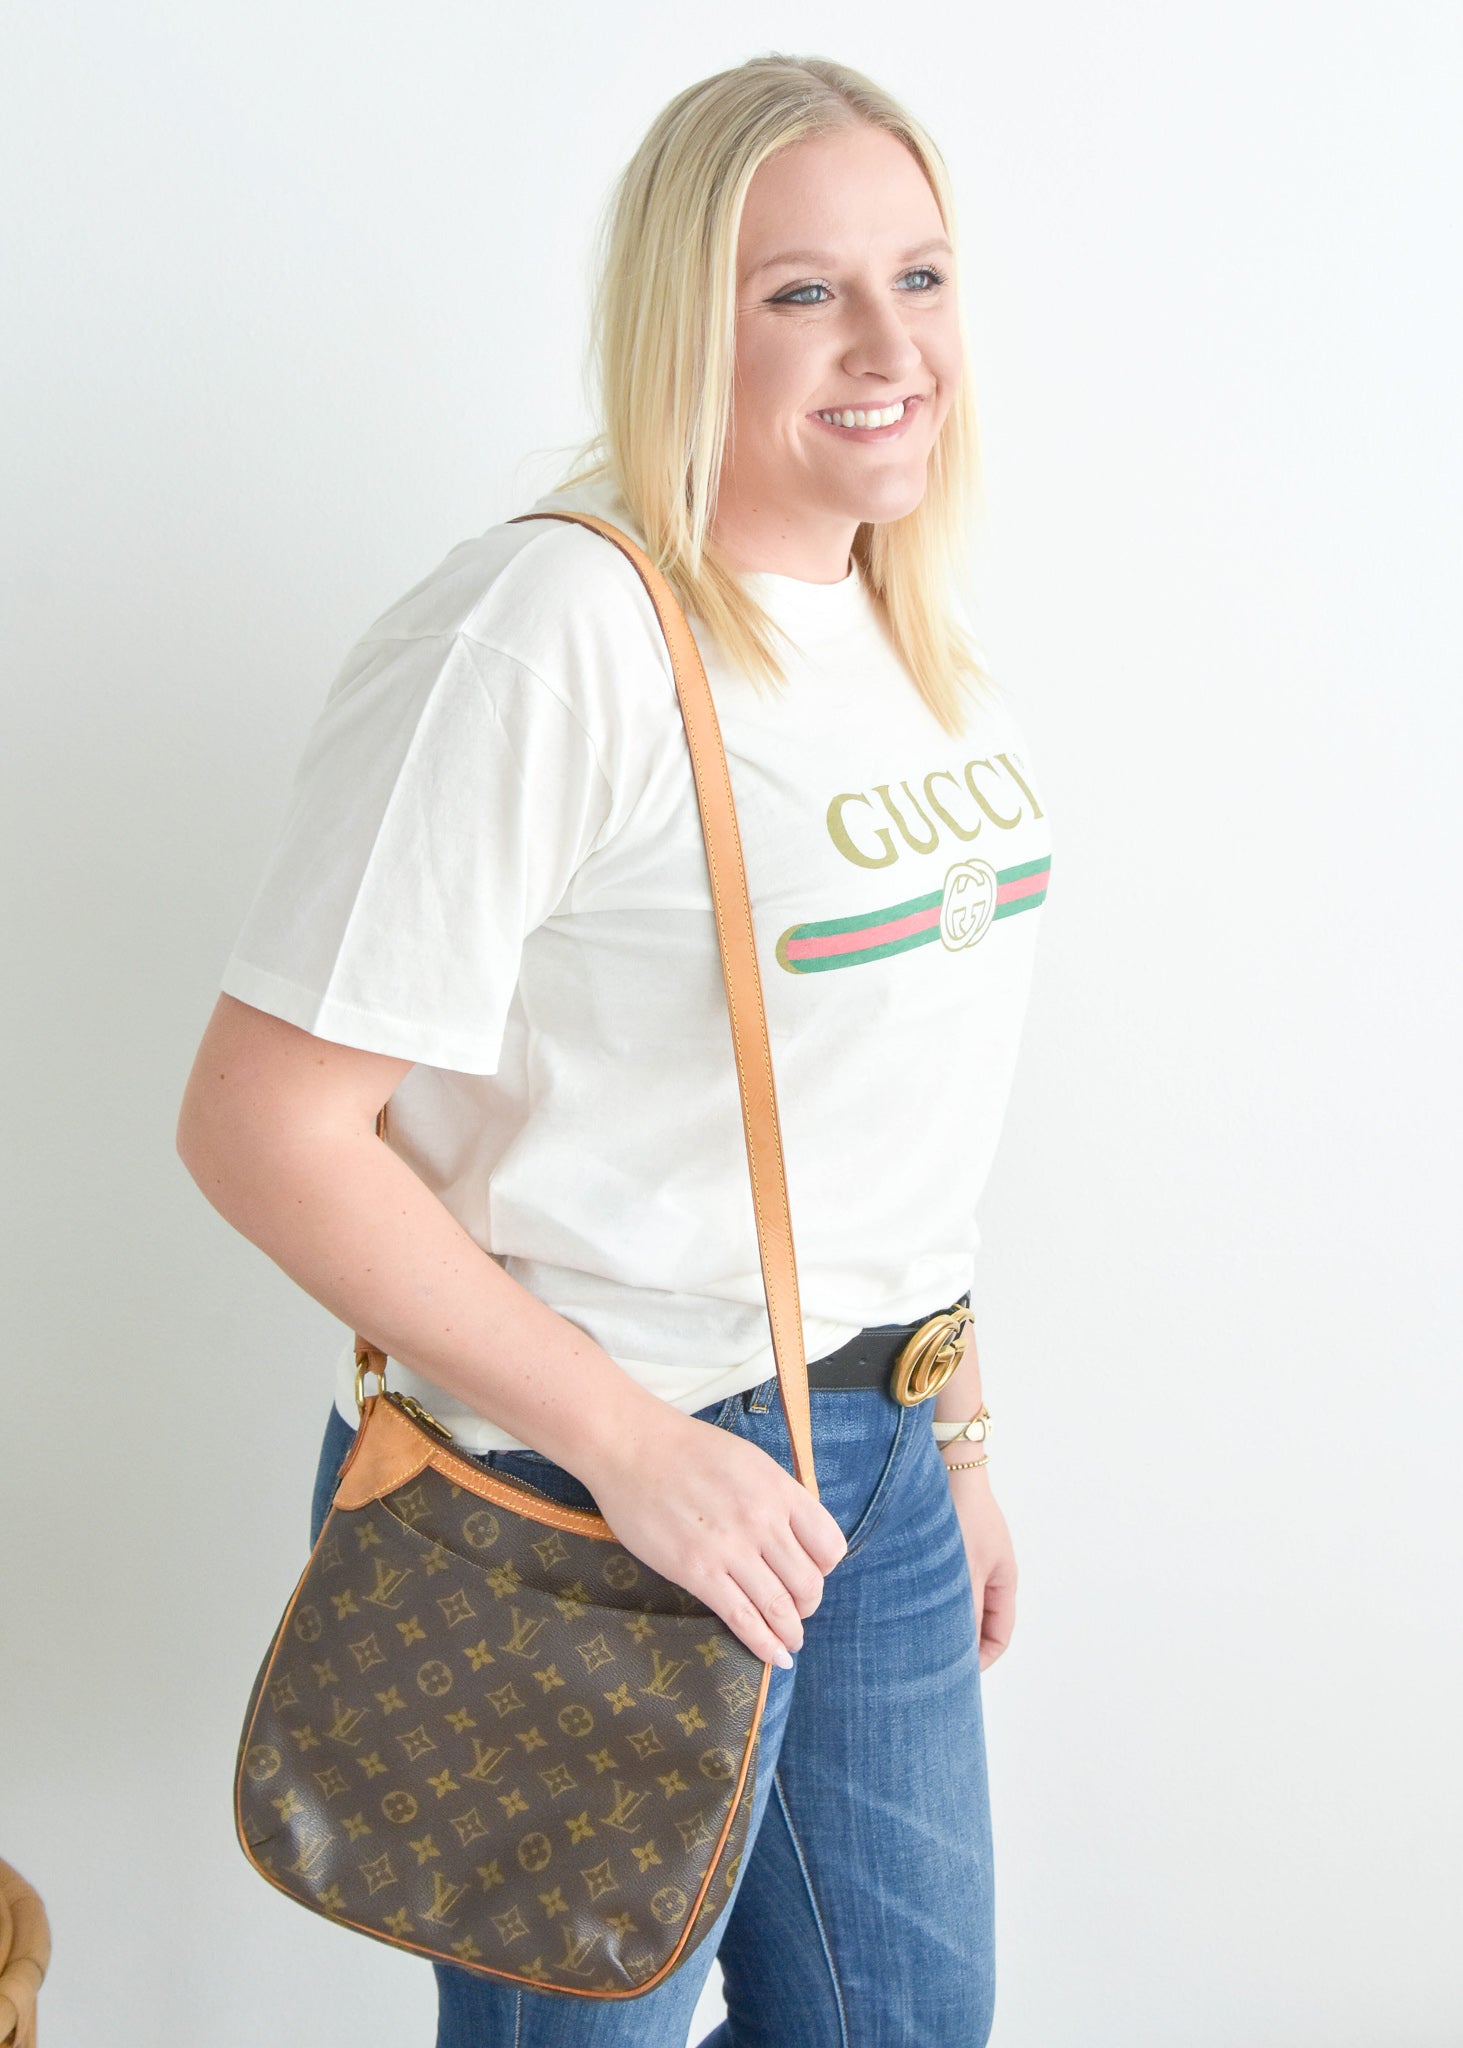 Louis Vuitton Odeon PM Crossbody Bag Review & Outfit Styling Video by  Handbagholic o… [Video]